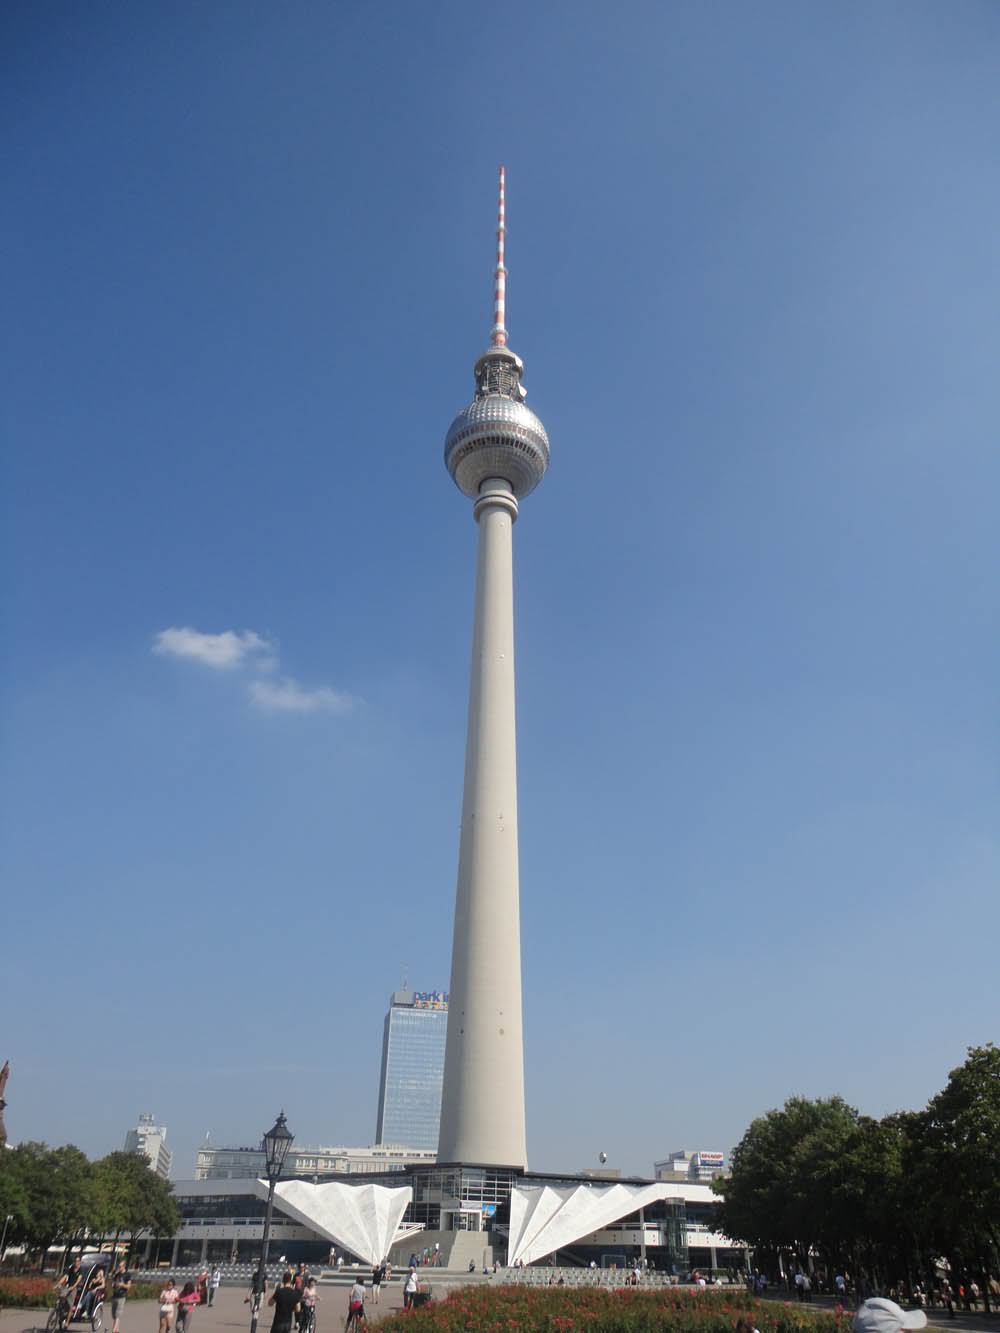 Beautiful Image Of The Fernsehturm Tower In Germany